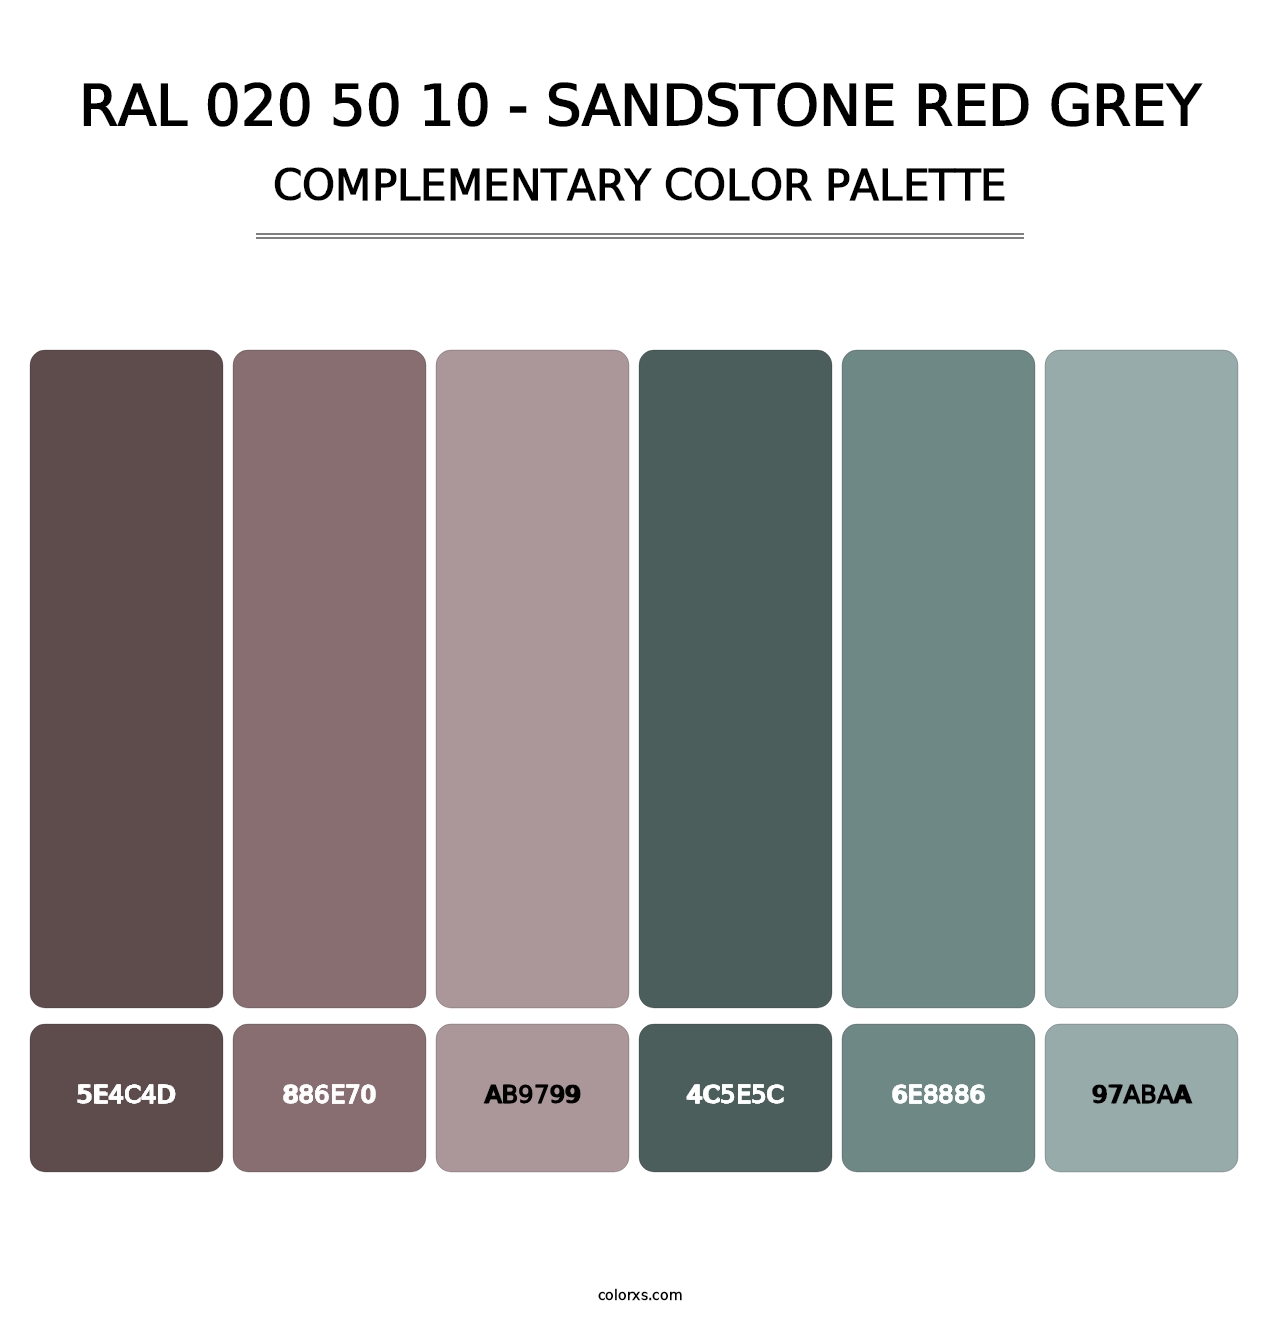 RAL 020 50 10 - Sandstone Red Grey - Complementary Color Palette